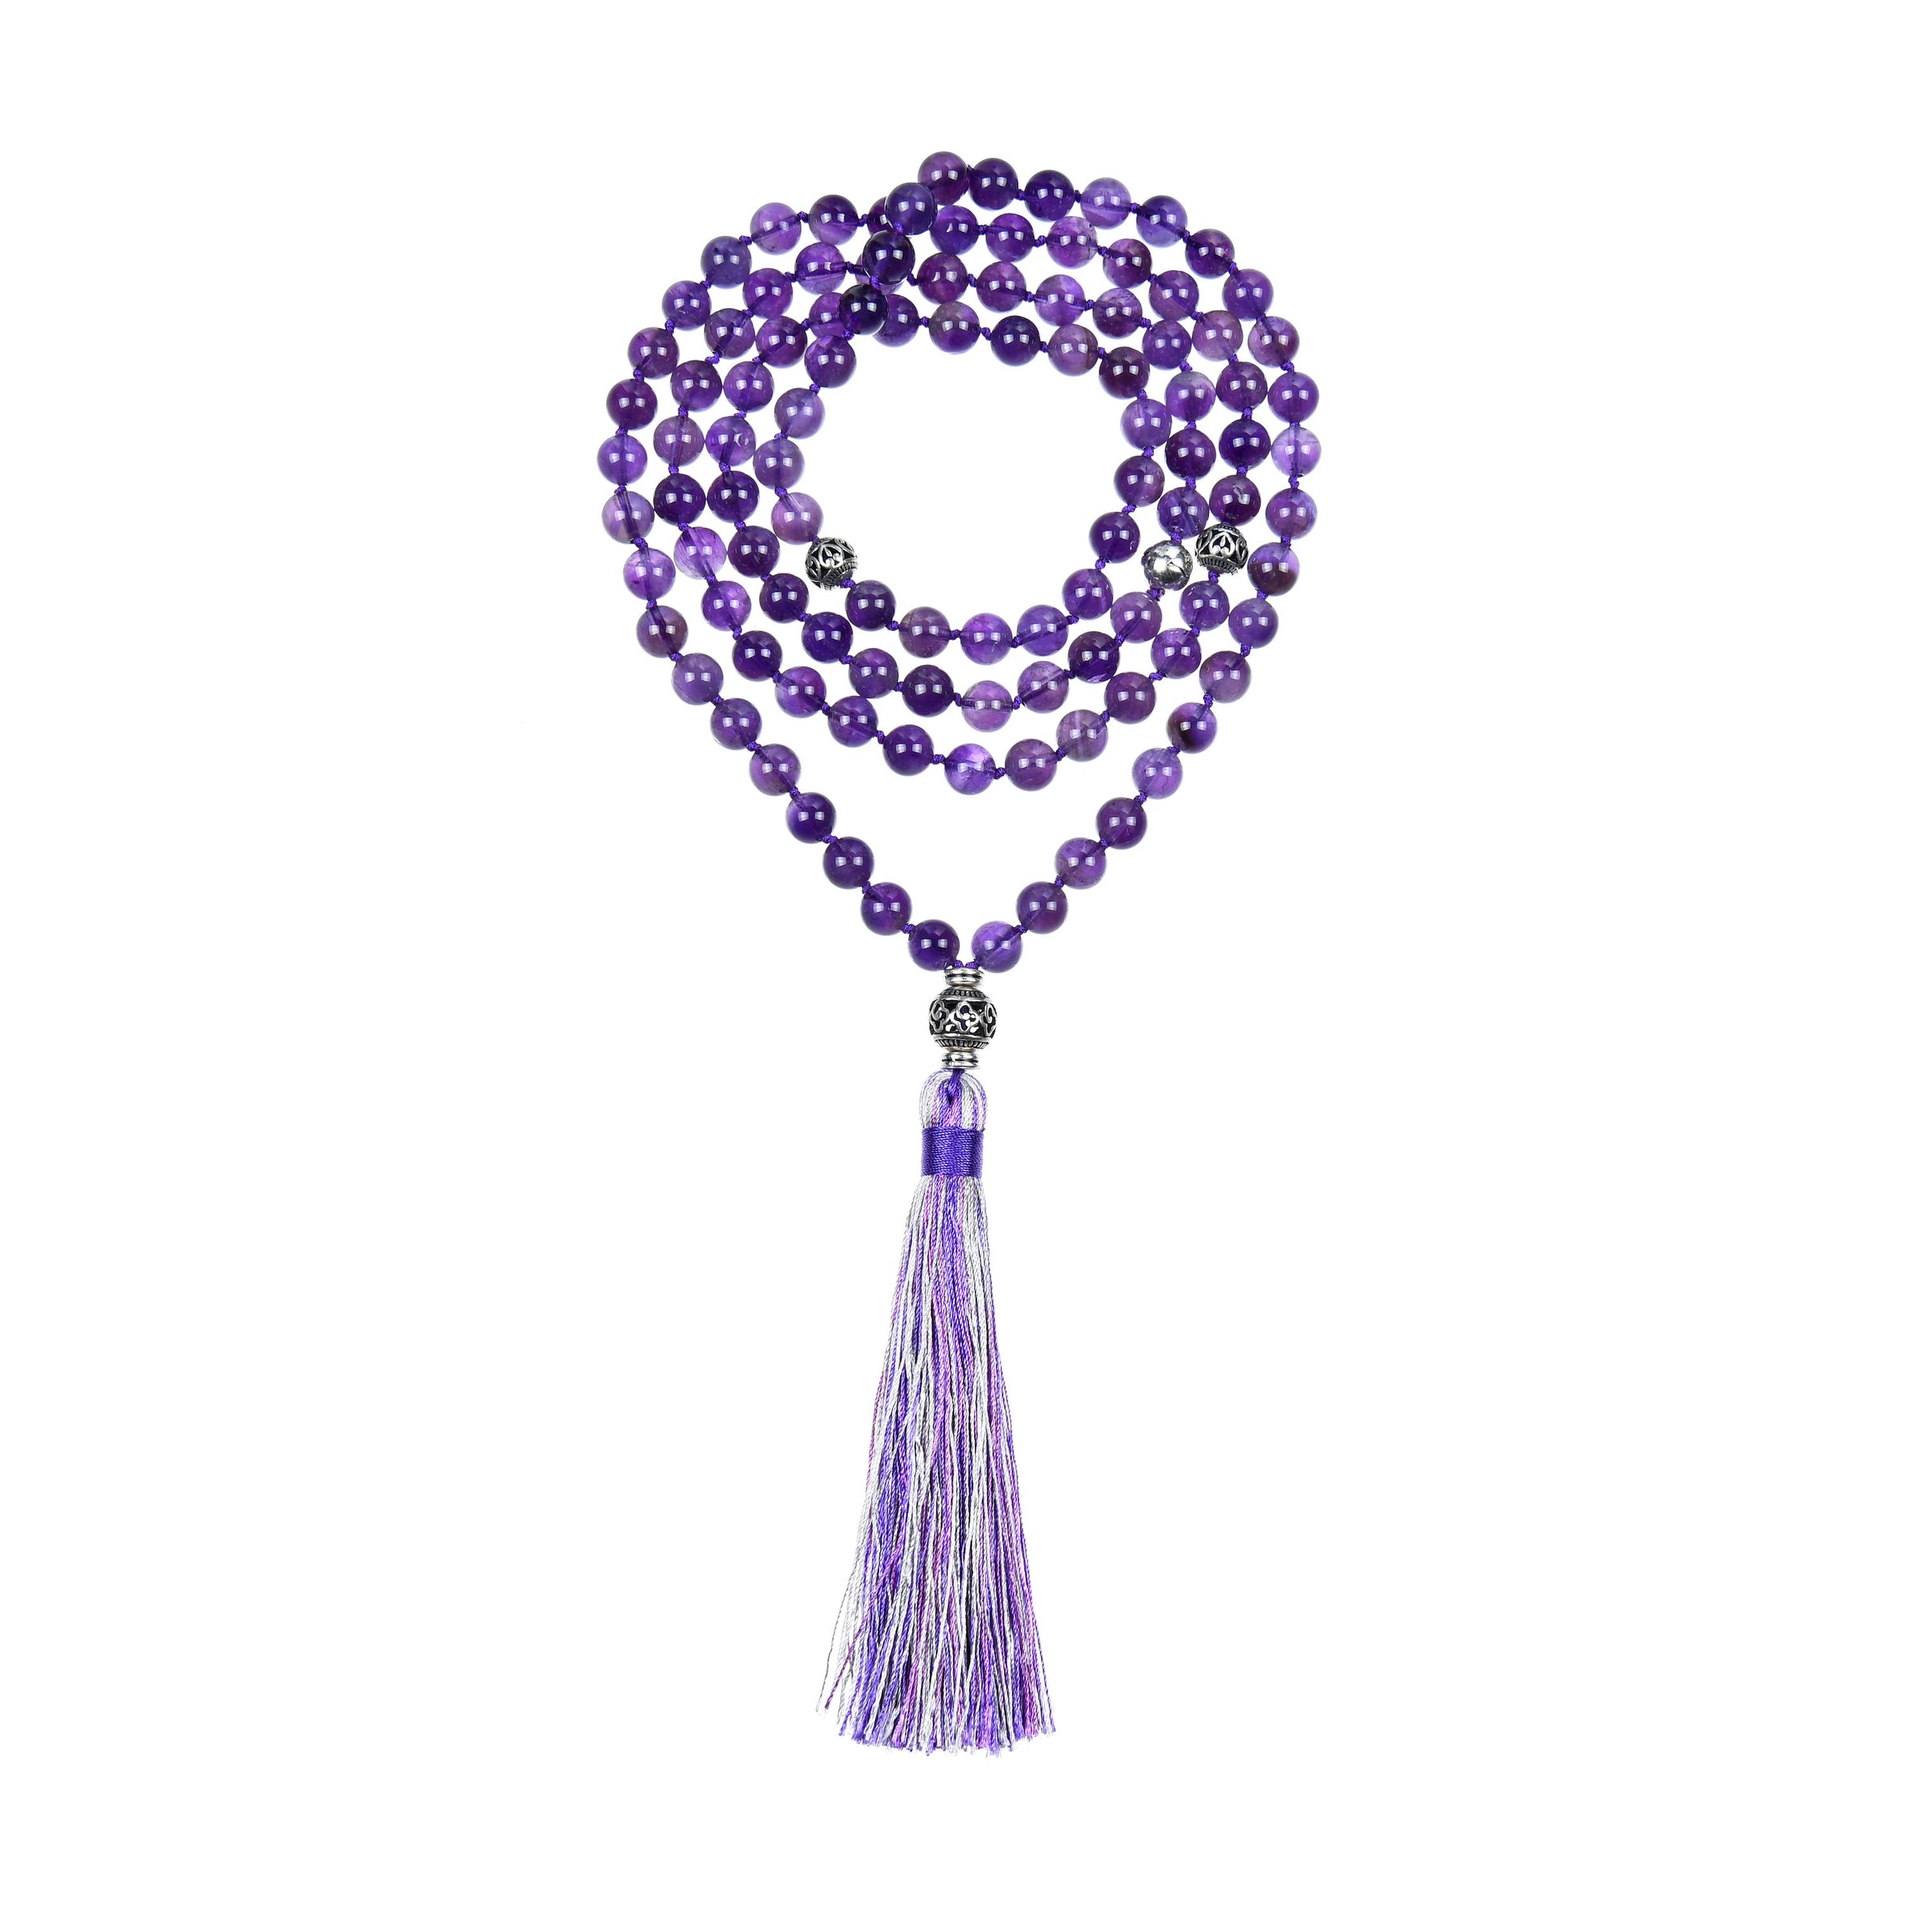 Mala Necklace | 108 Hand-Knotted 8mm Round Beads (Amethyst)